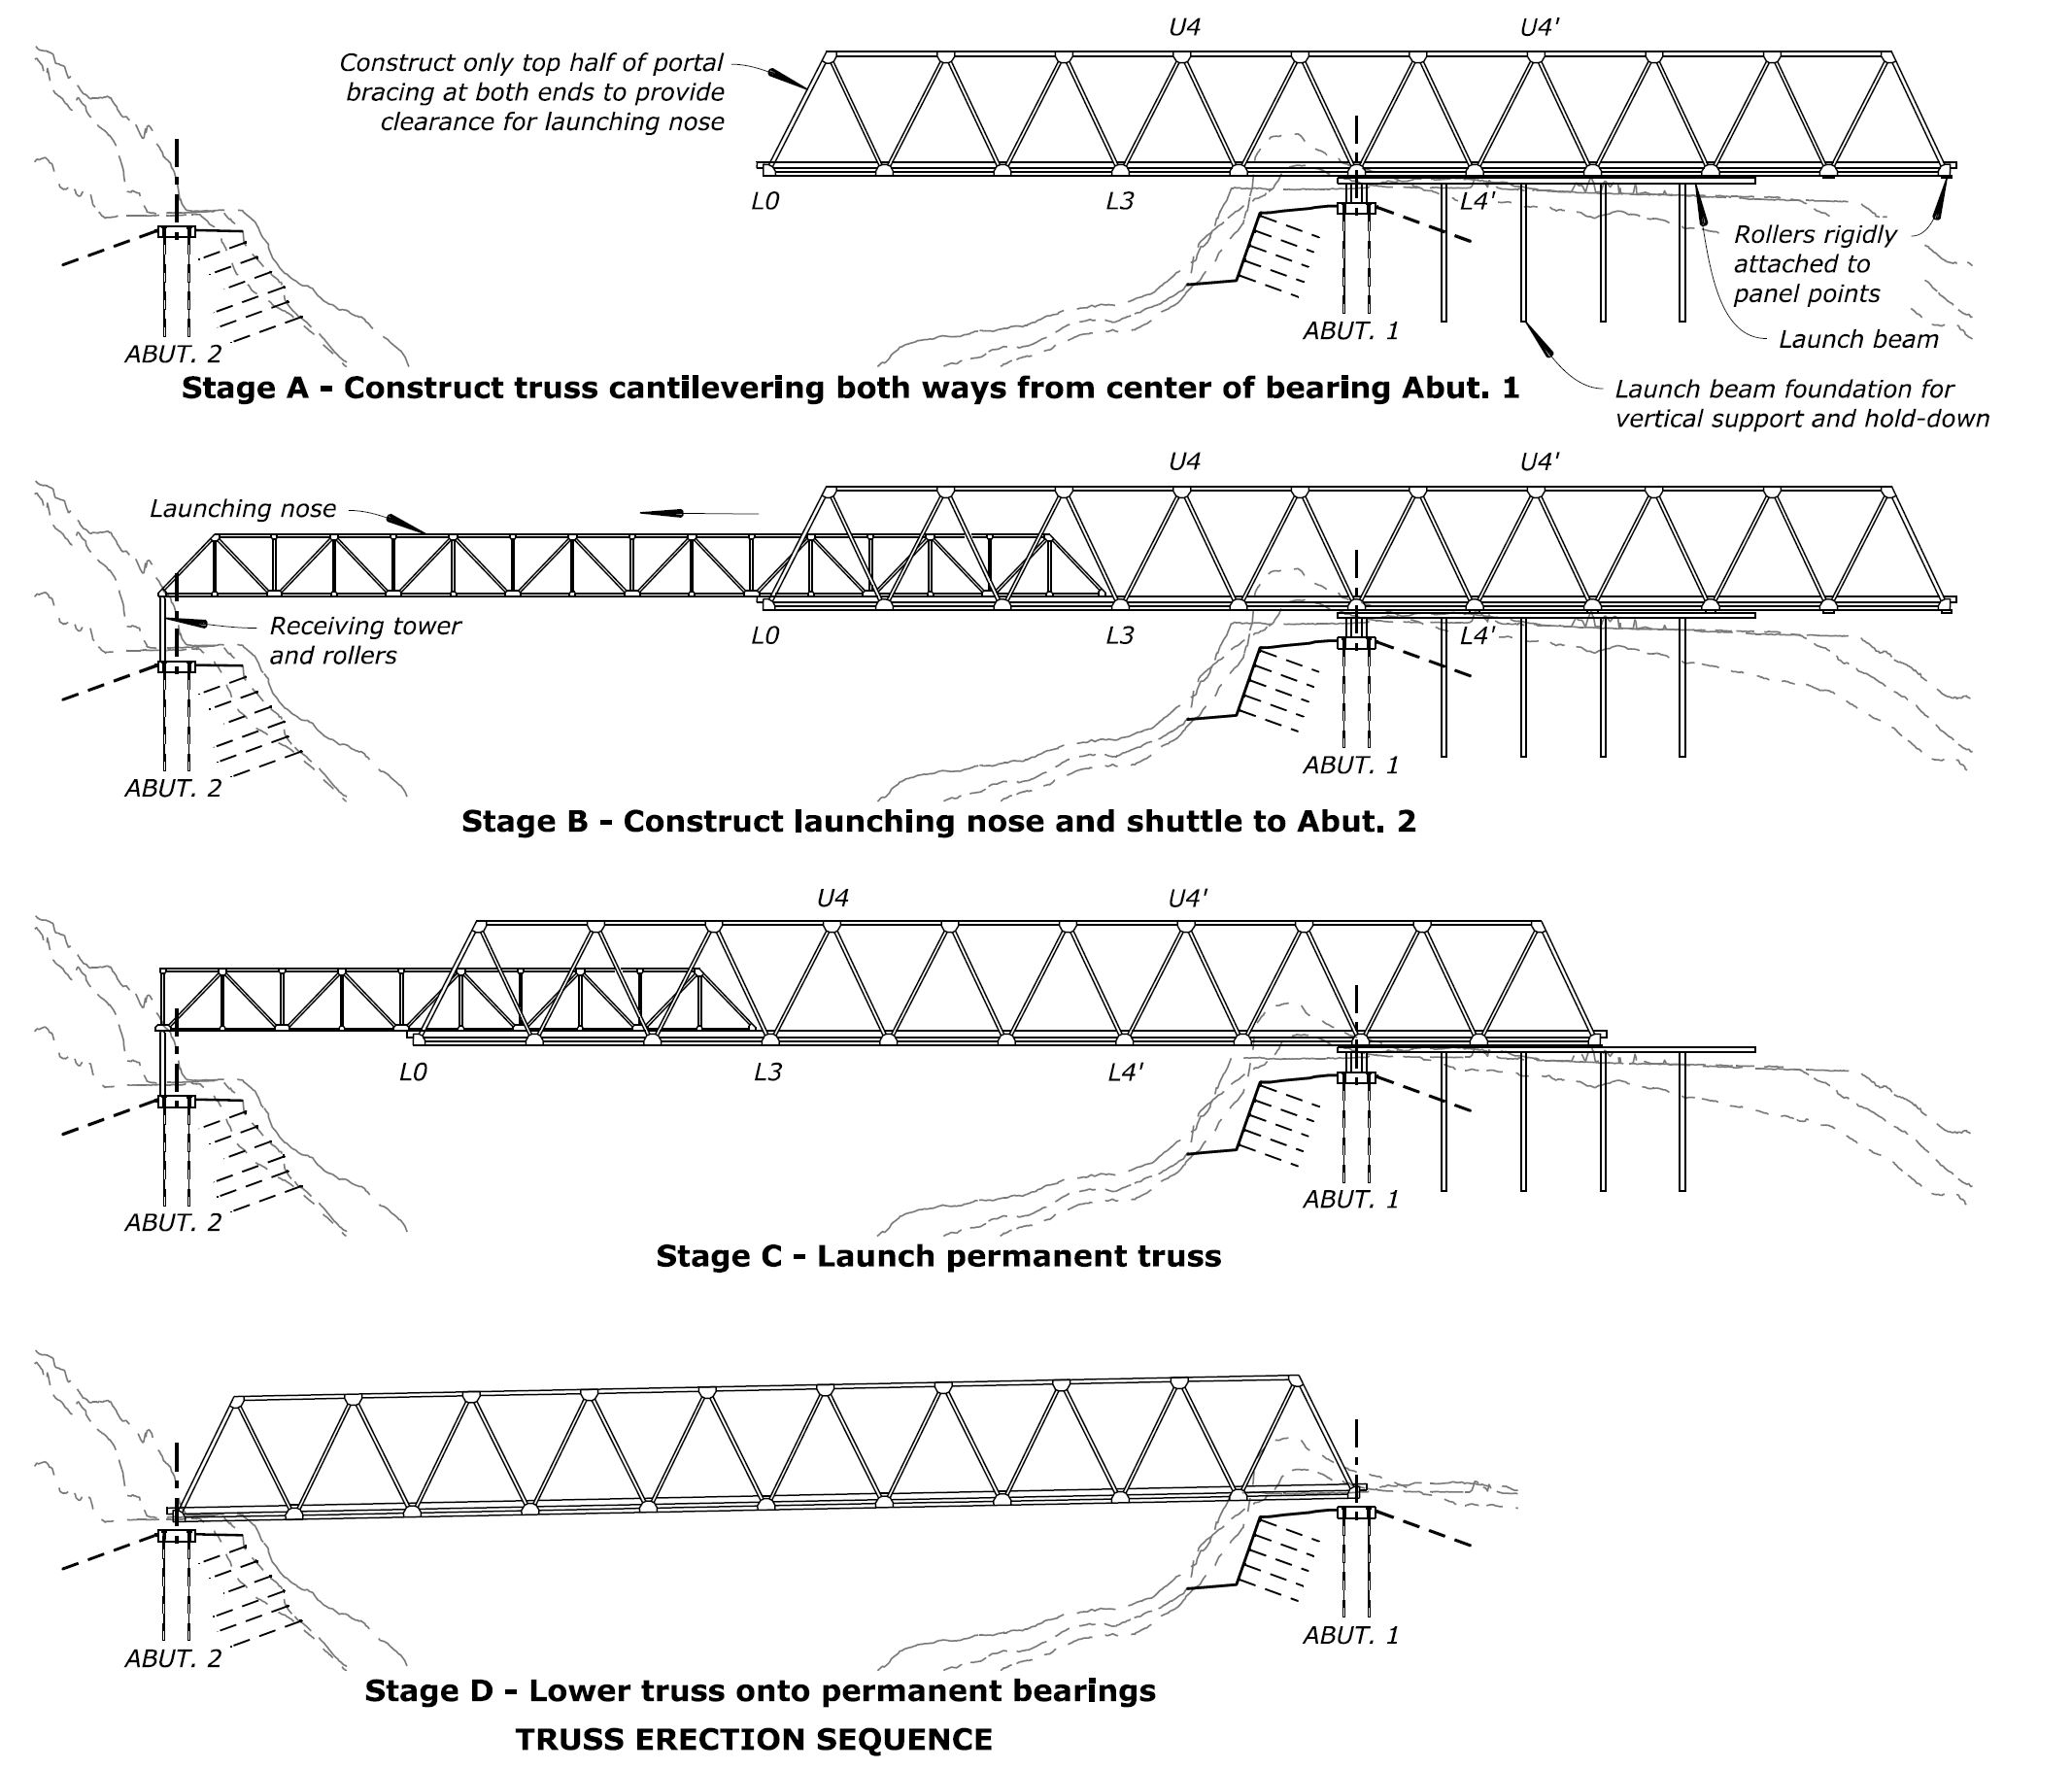 Four stage illustration of the bridge being constructed on the east side of the landslide and launched to the west side.